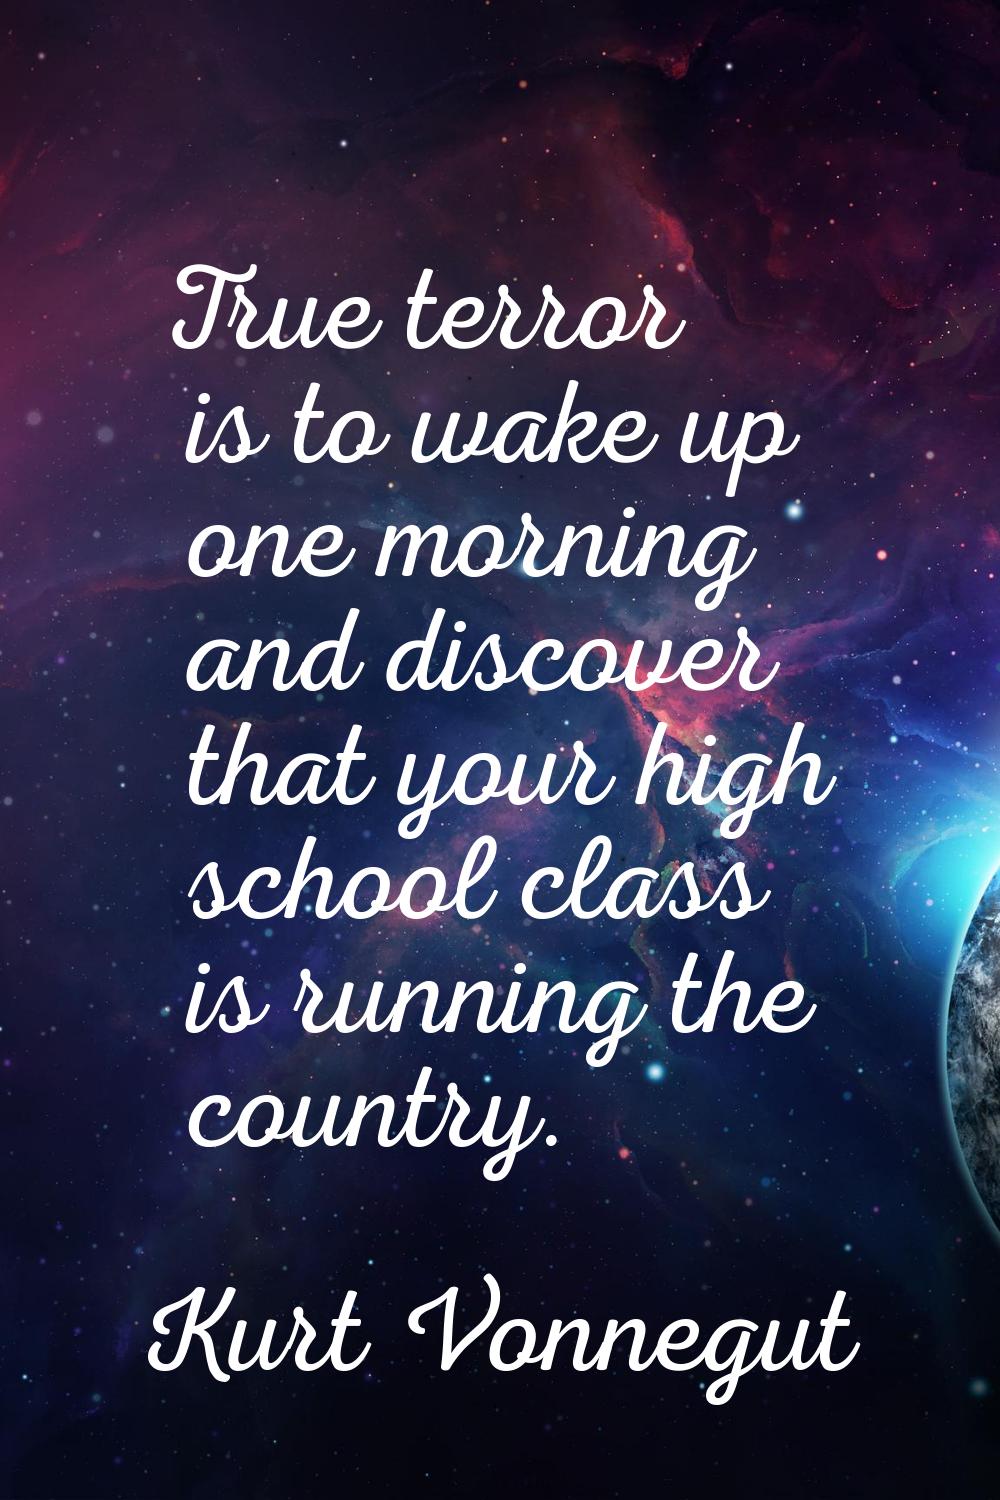 True terror is to wake up one morning and discover that your high school class is running the count